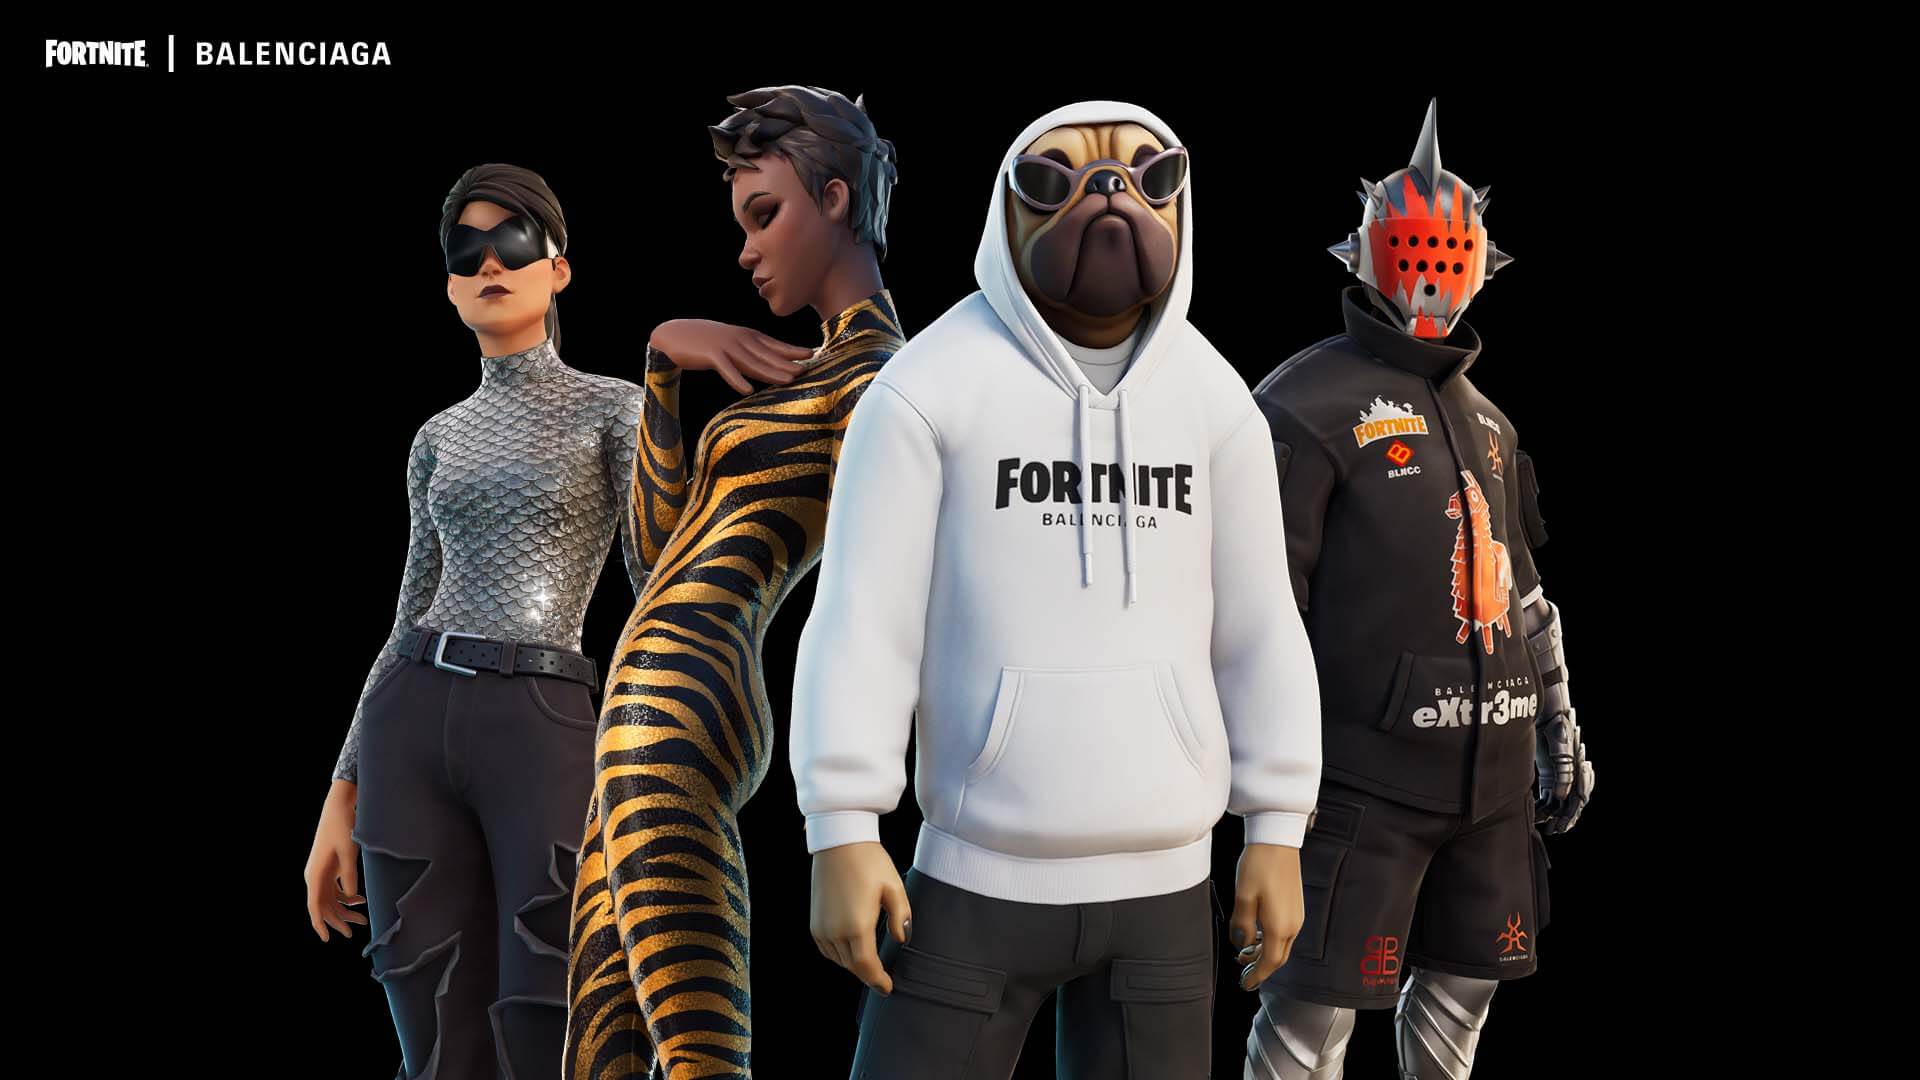 balenciaga joining the metverse by collaborating with Fortnite 